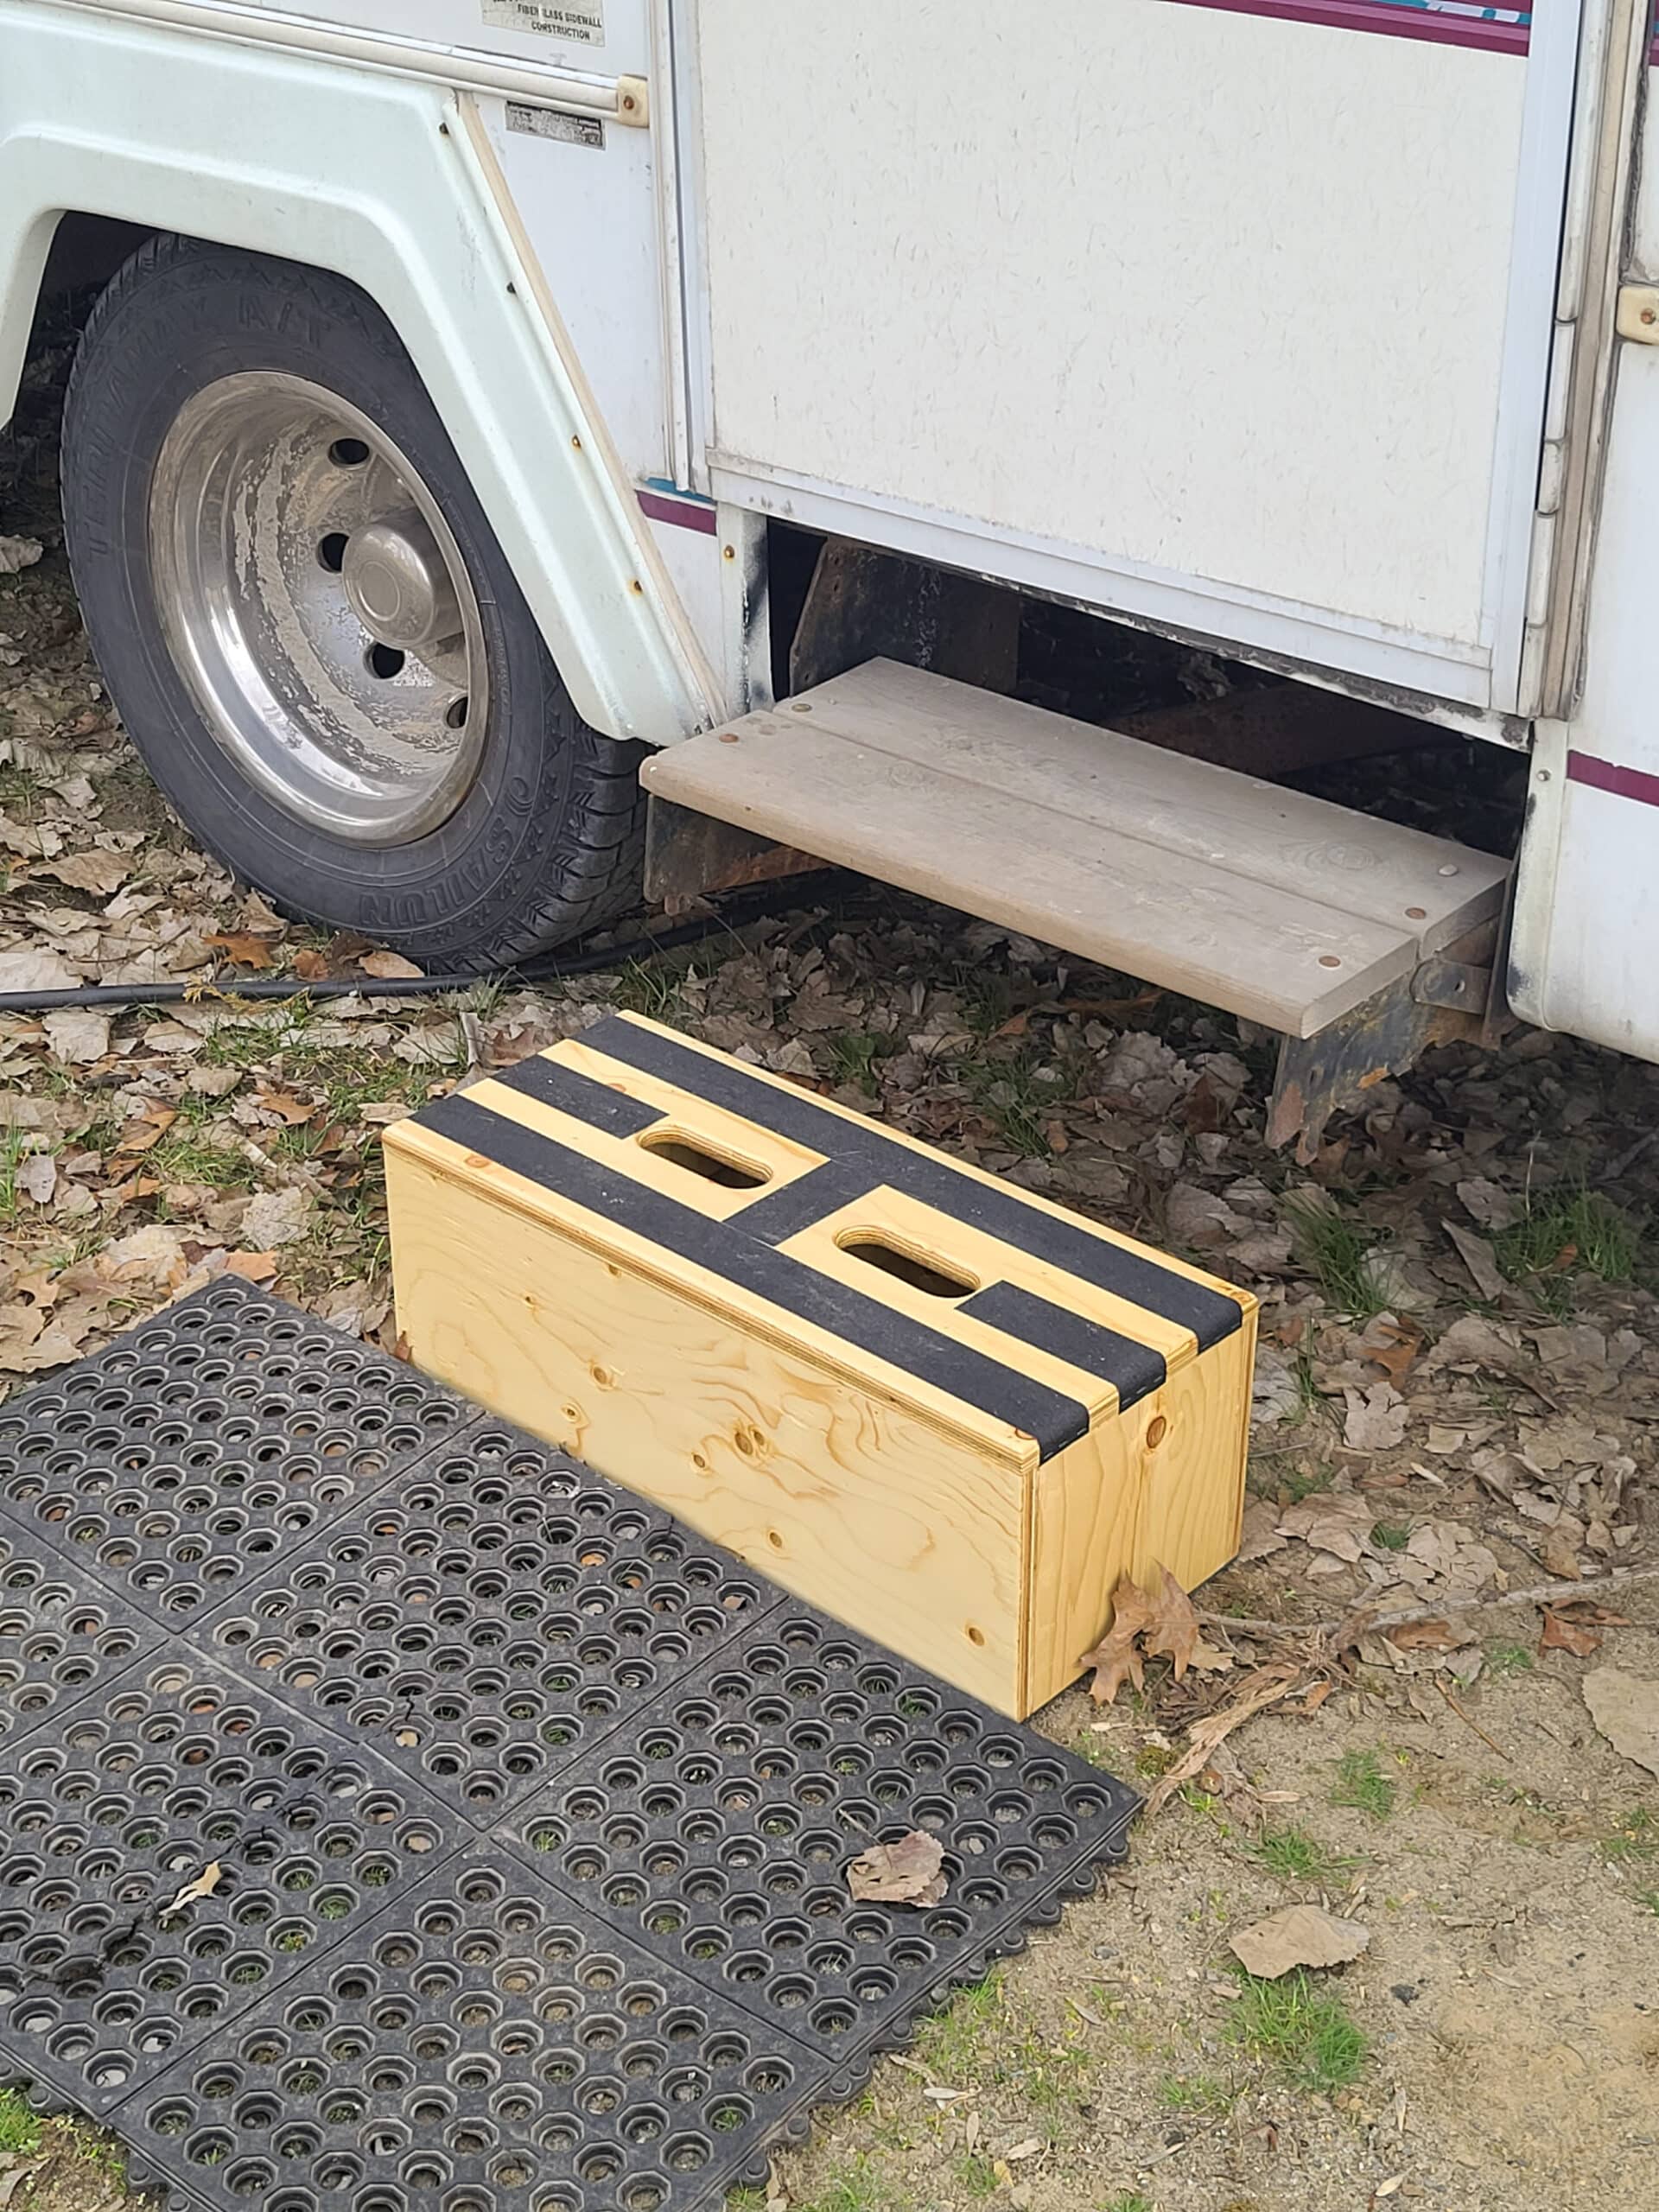 A motorhome with a single fold out step very high. A wood step below it, and a rubber mat on the ground. Overlaid text says Build Your Own RV Camper Step.